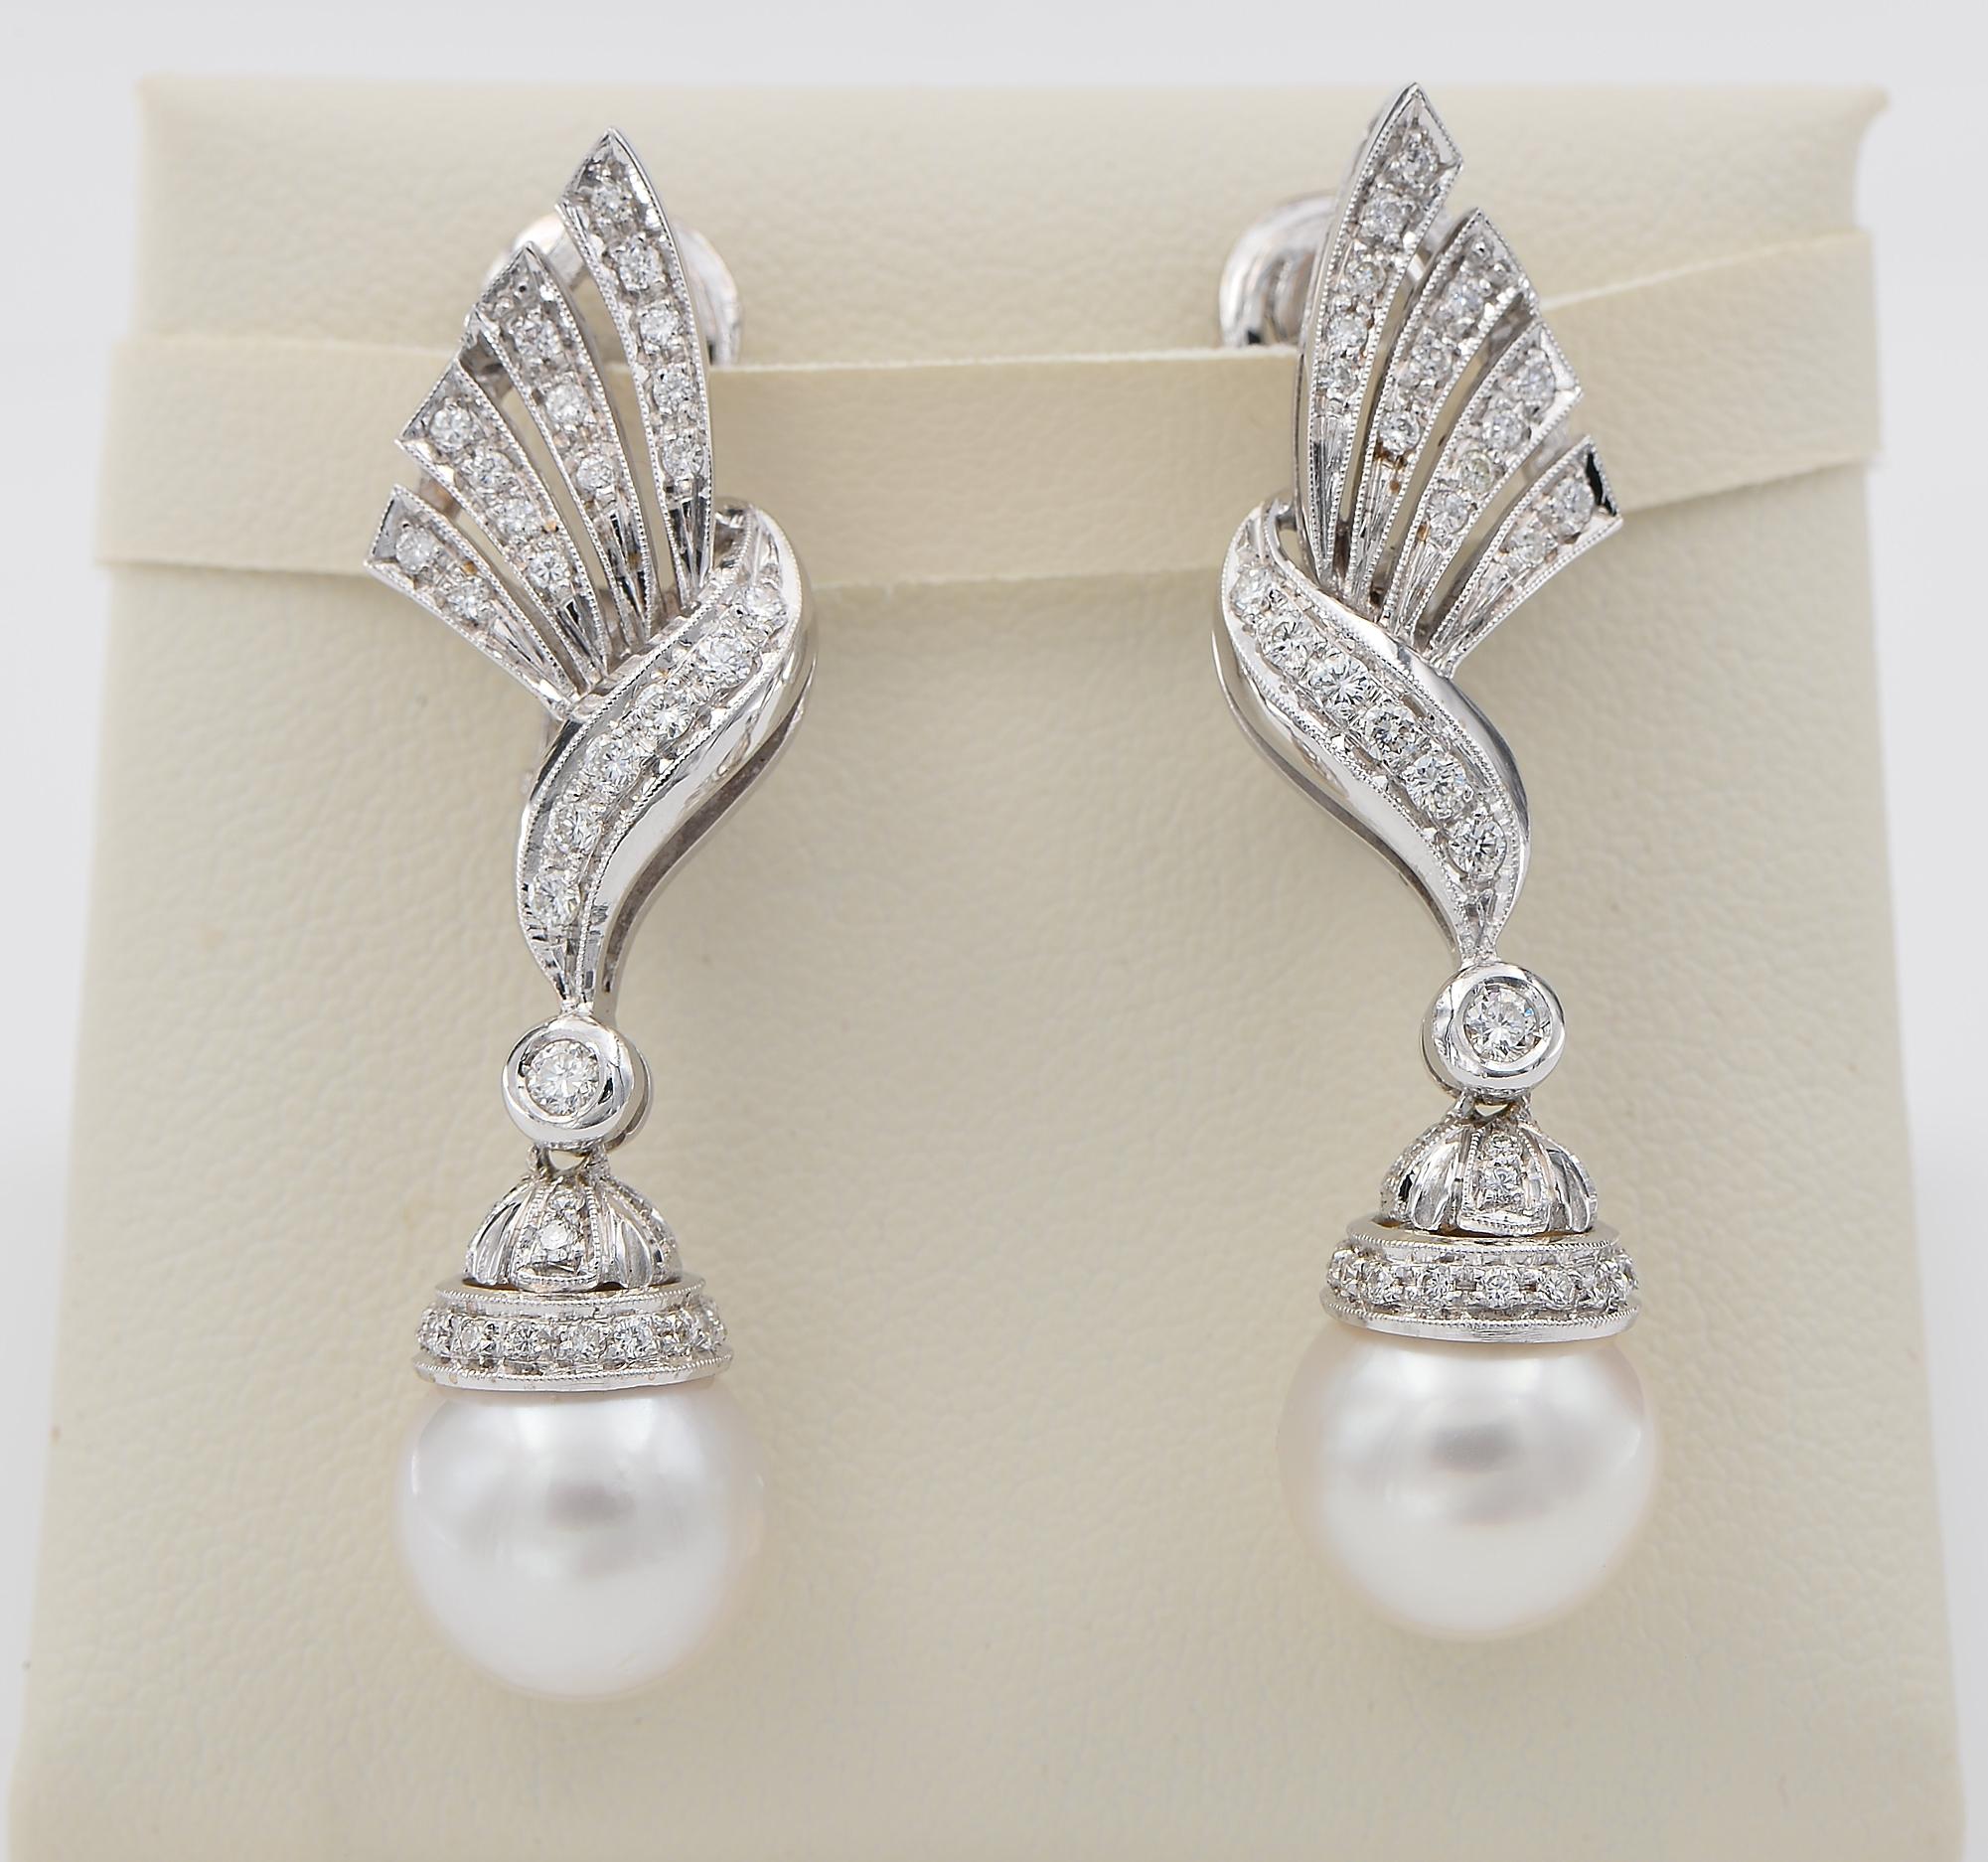 Glamorous 60’s
Pearl and Diamond the winning combination in trend during the 60’s, much expressed by first ladies and divas of the time, simple, understated, in vogue for daytime as much as evening
These gorgeous cocktail earrings are 1960 ca, long